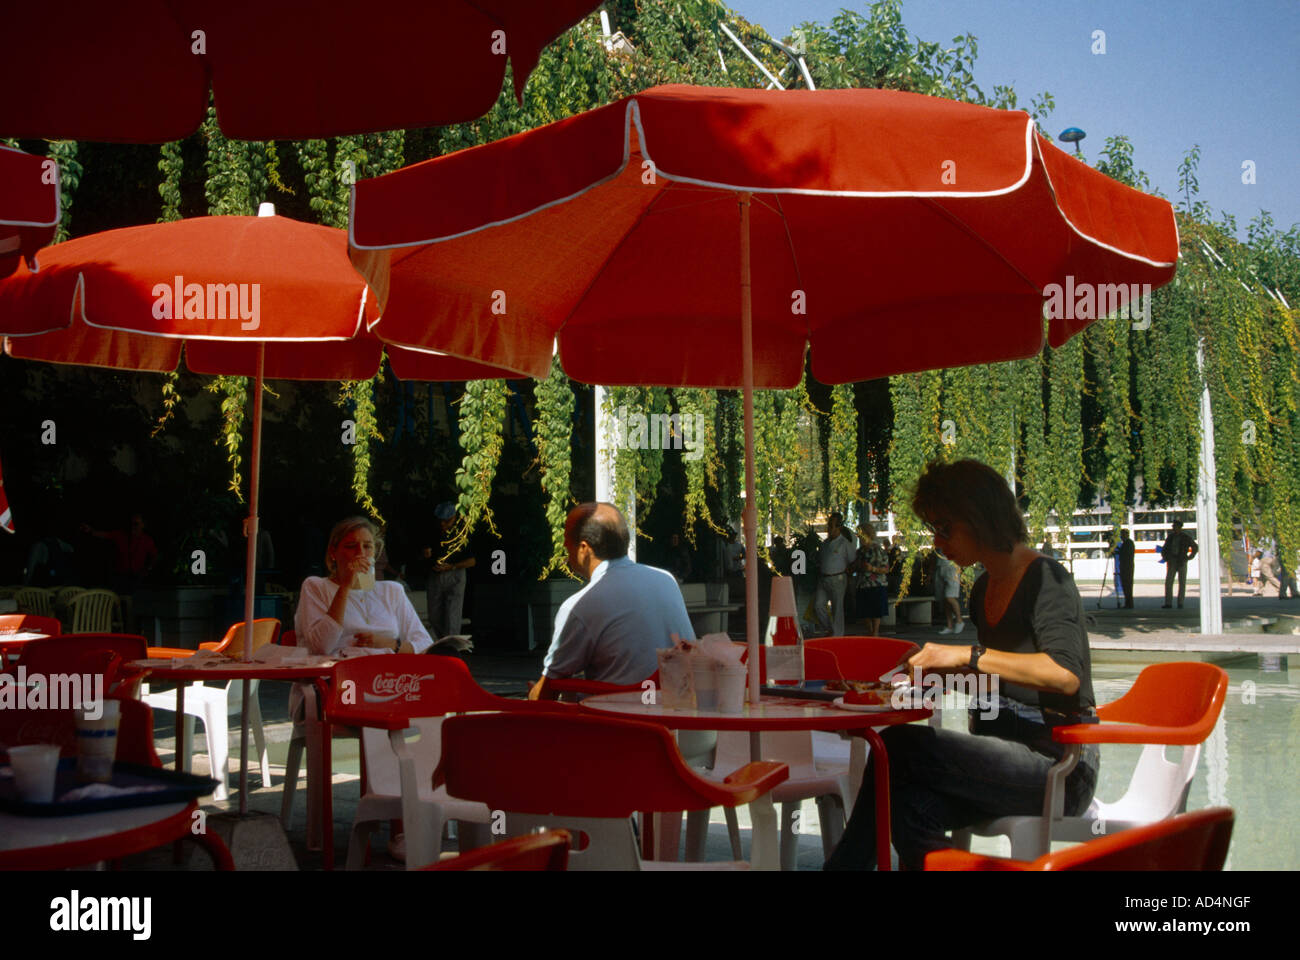 Seville Spain Cafe At Expo 92 Eating Under Umbrellas Stock Photo